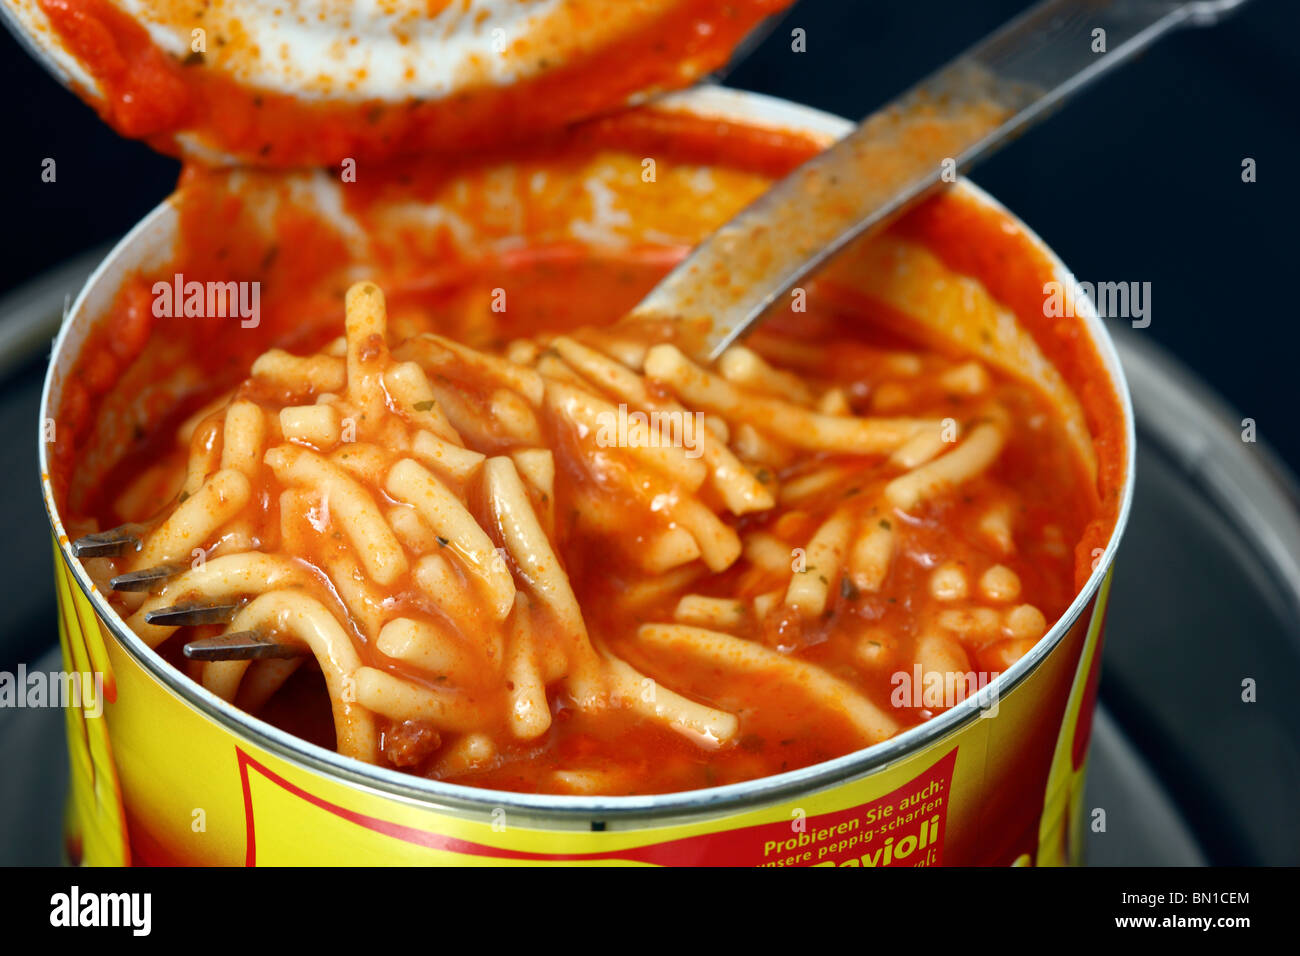 Heating of ready-to-serve meals in hot water. Soups or pasta dishes in cans. Convenience food products. Spaghetti. Stock Photo